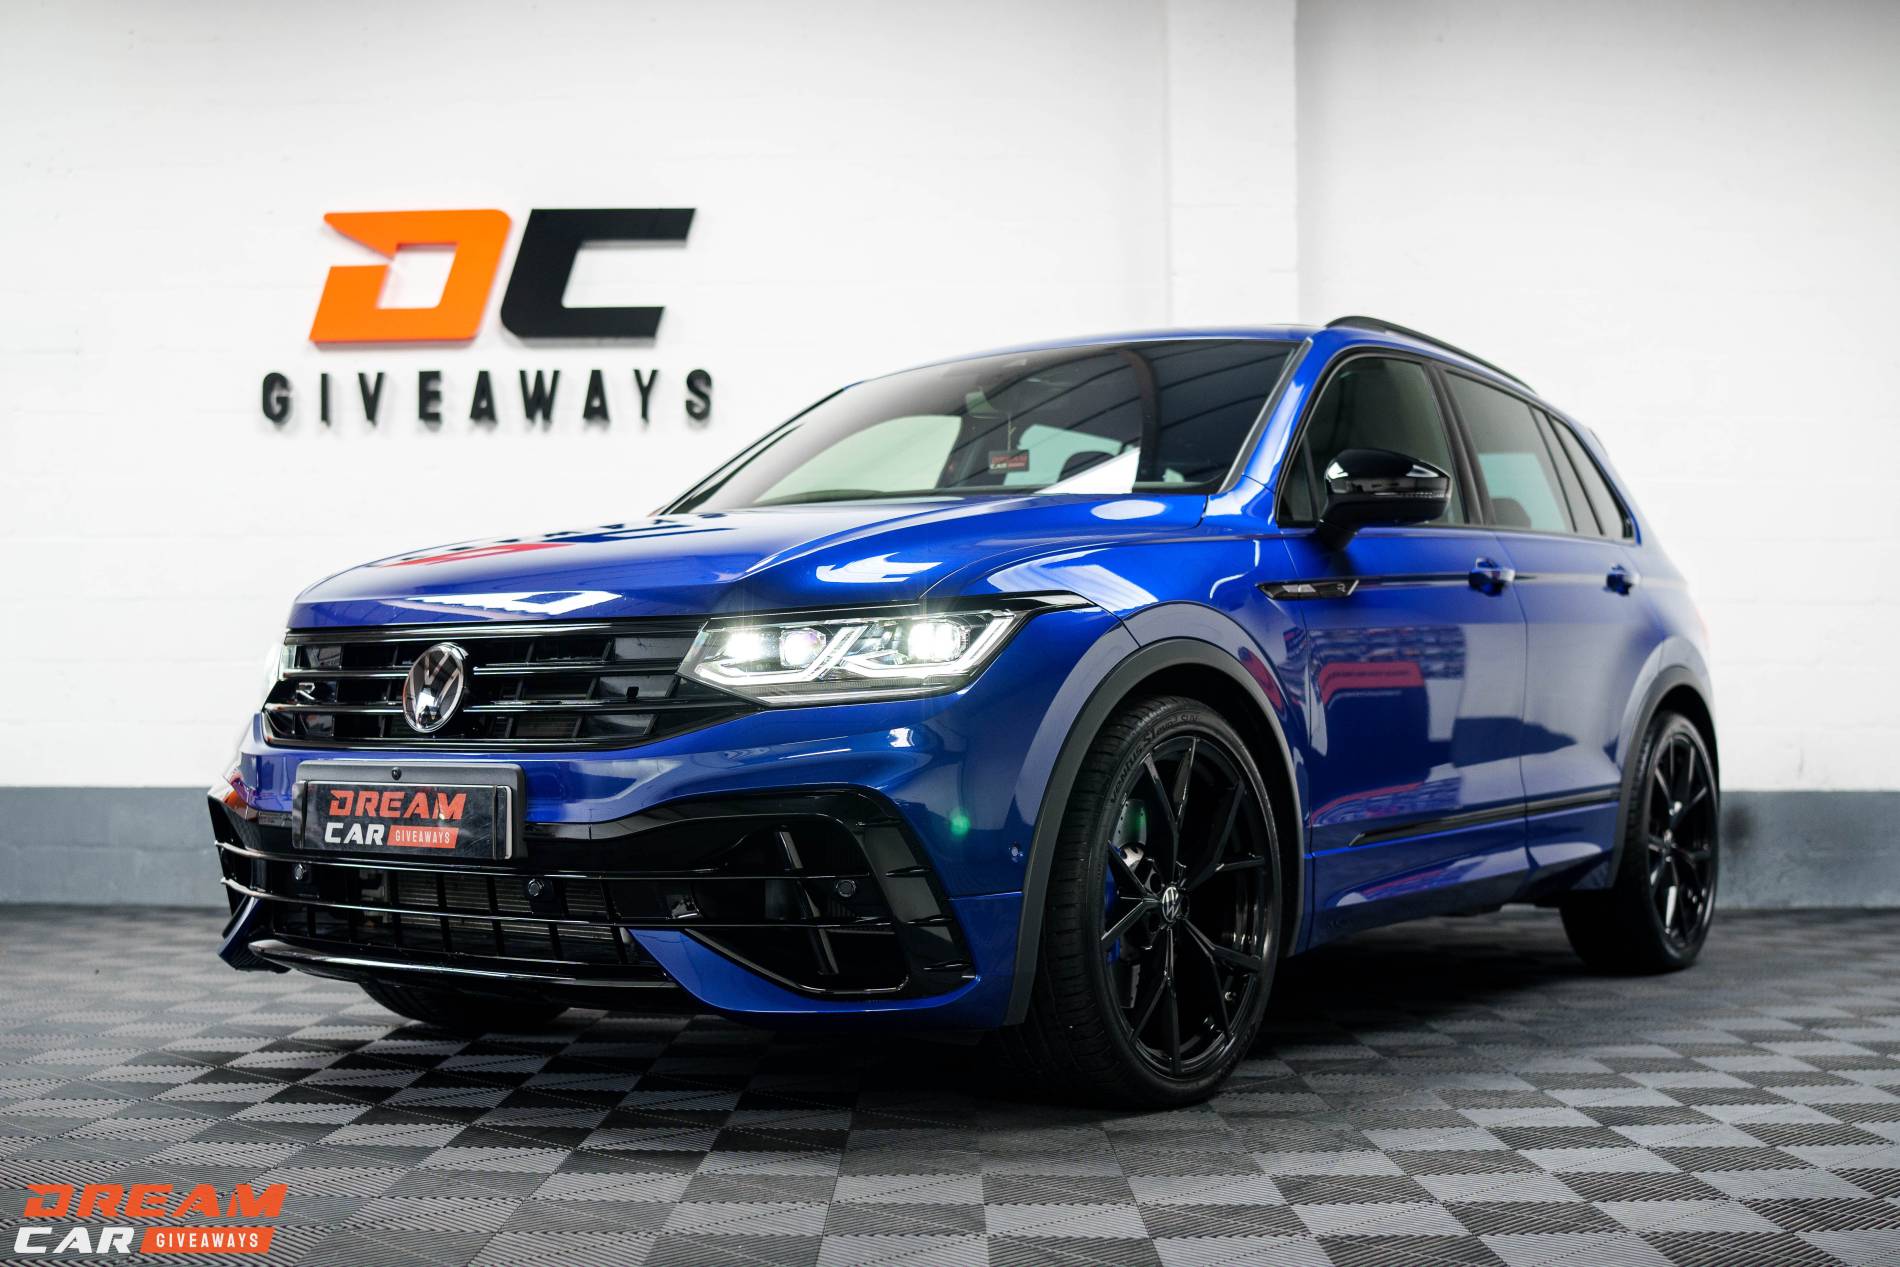 Win this 2023 Volkswagen Tiguan R & £1,000 or £38,000 Tax Free